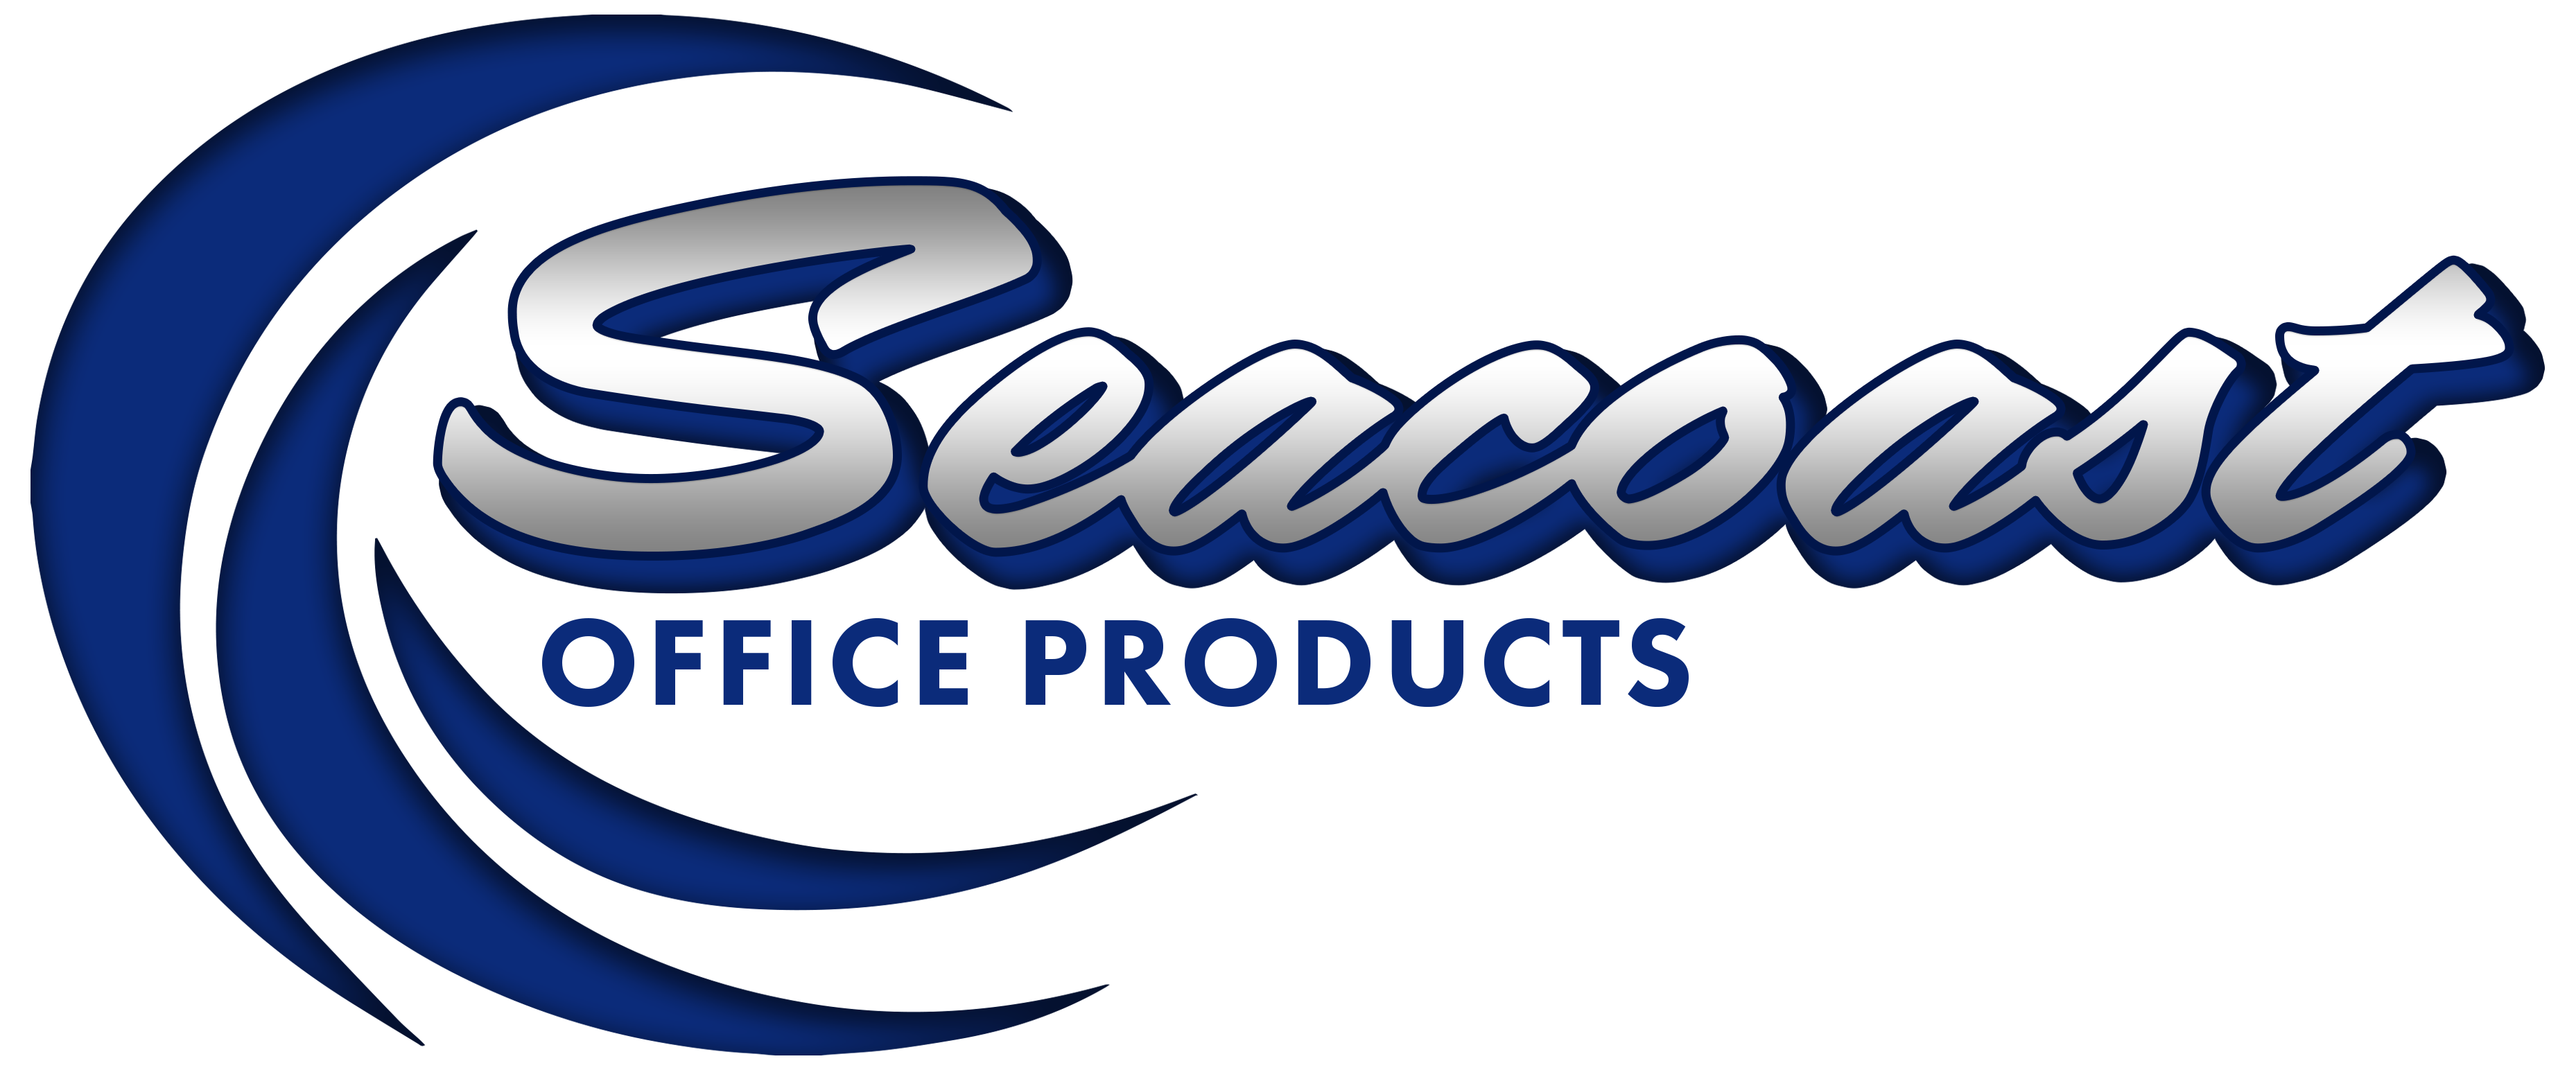 https://www.seacoastofficeproducts.com/Images/Seacoast%20Office%20Products.png